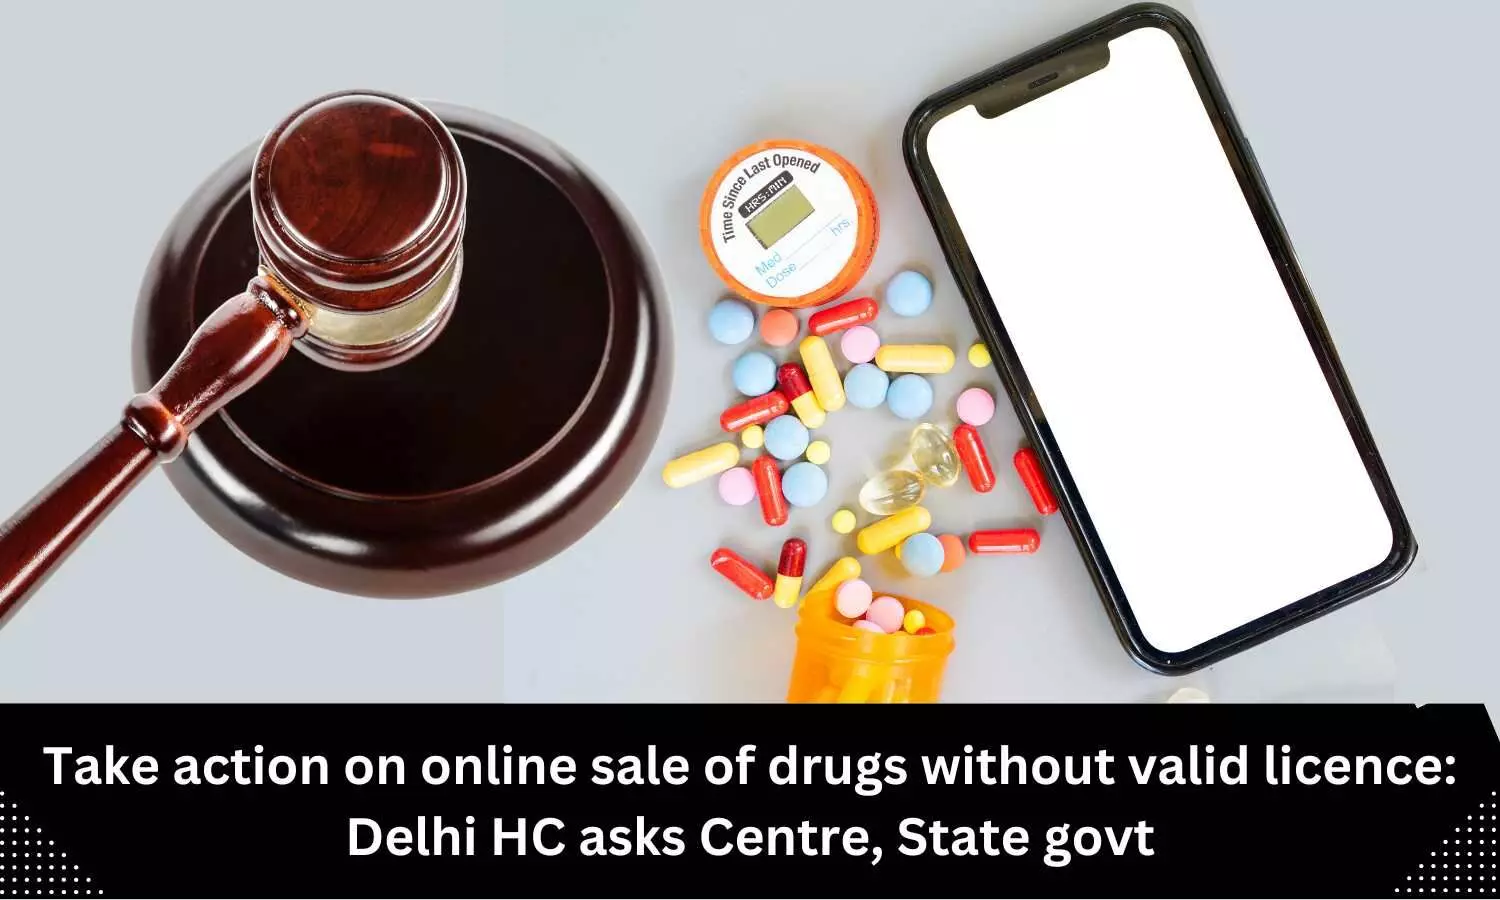 Delhi HC directs Centre, State govt to take action on online sale of drugs without valid licence